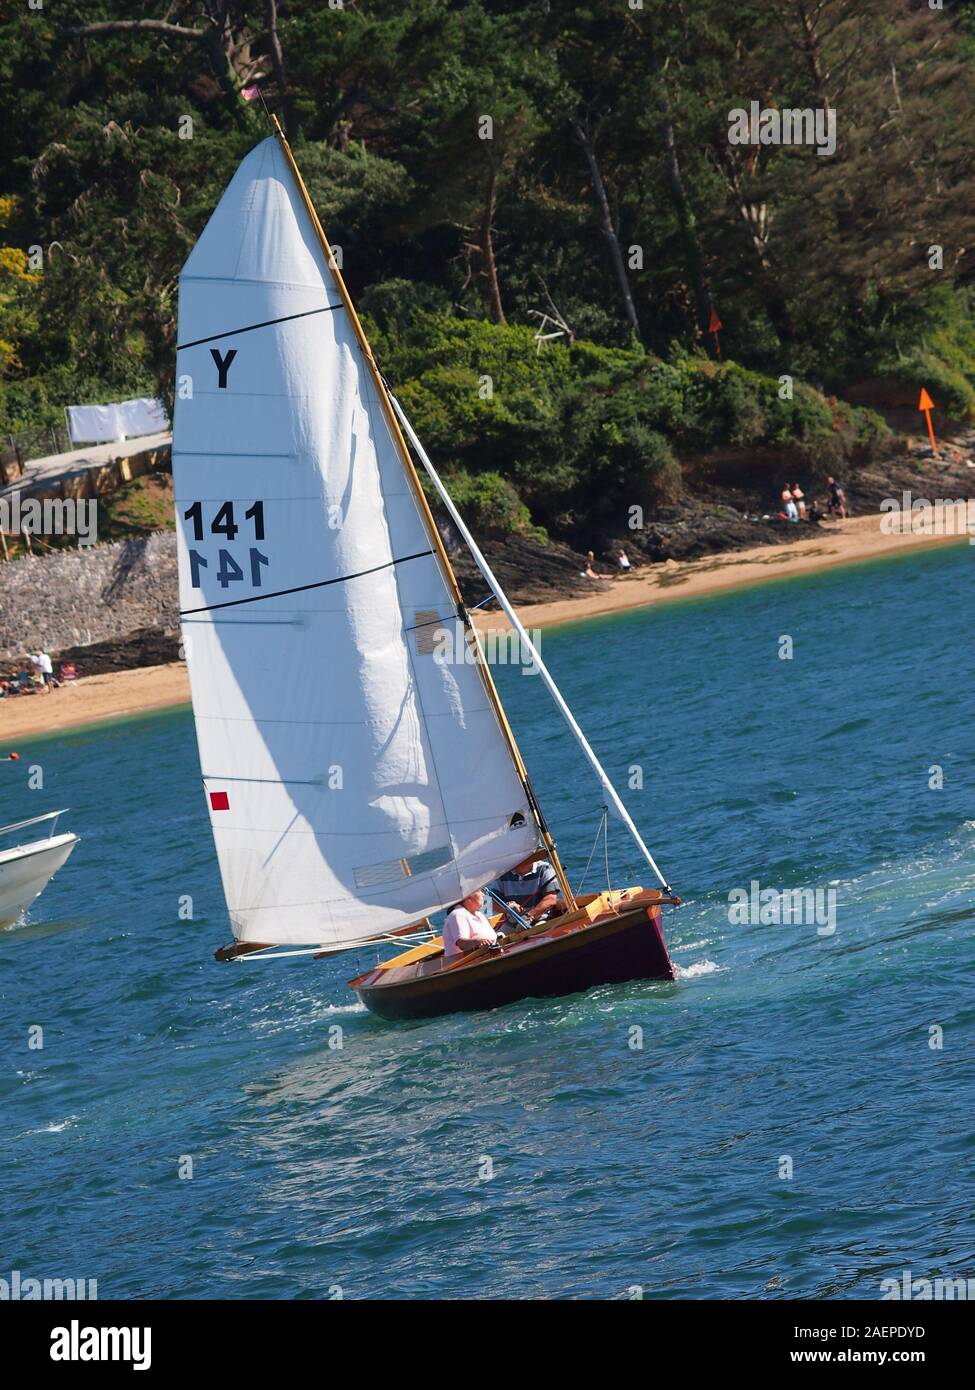 A traditional Salcombe Yawl sailing boat on the Salcombe Estuary in Devon, UK. Stock Photo